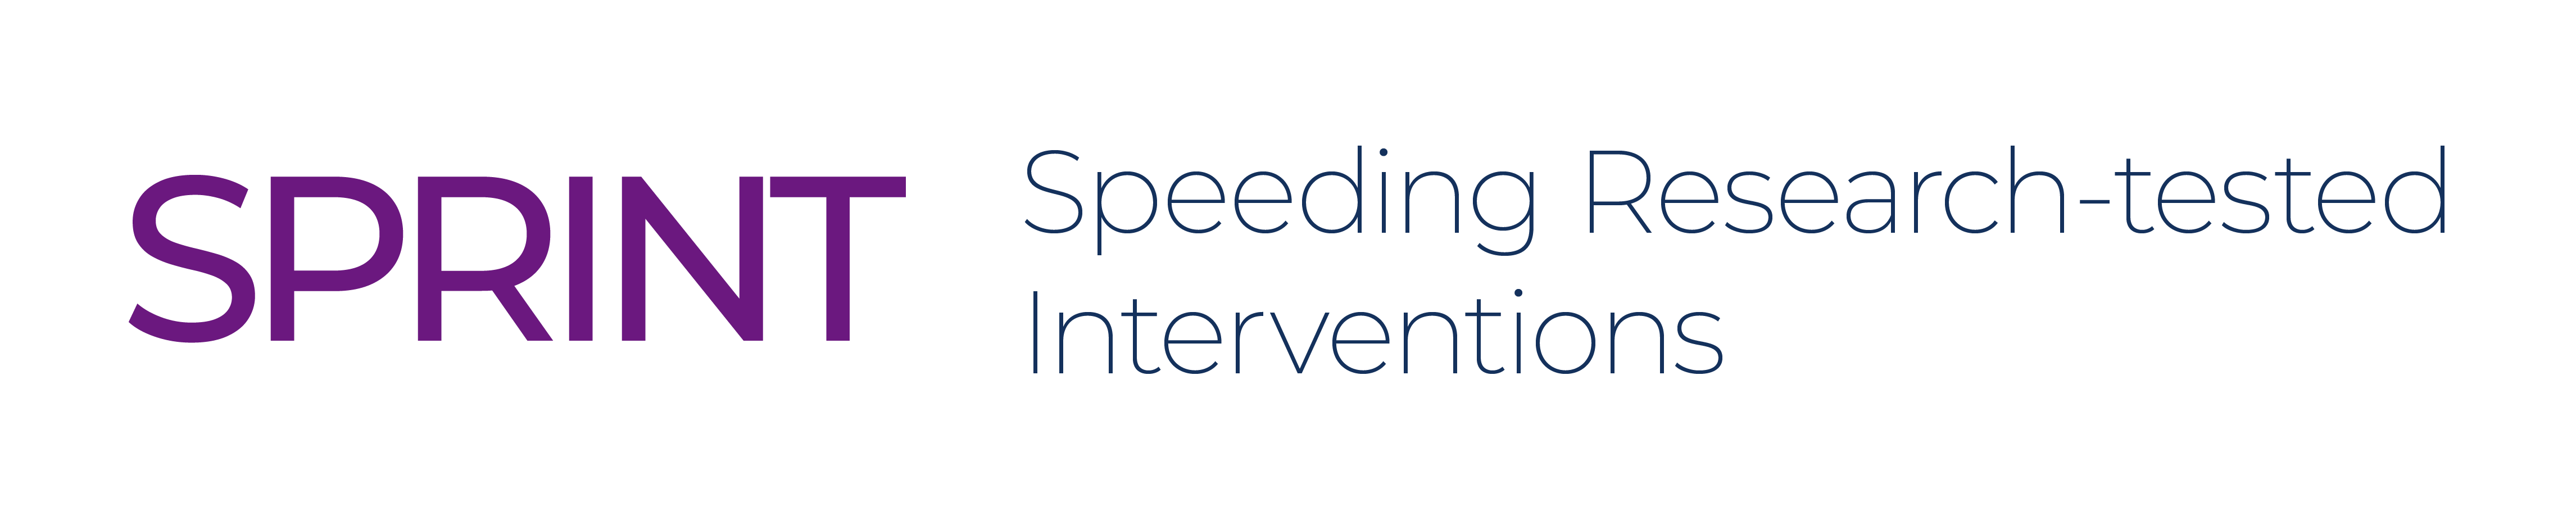 SPeeding Research-tested INTerventions (SPRINT)